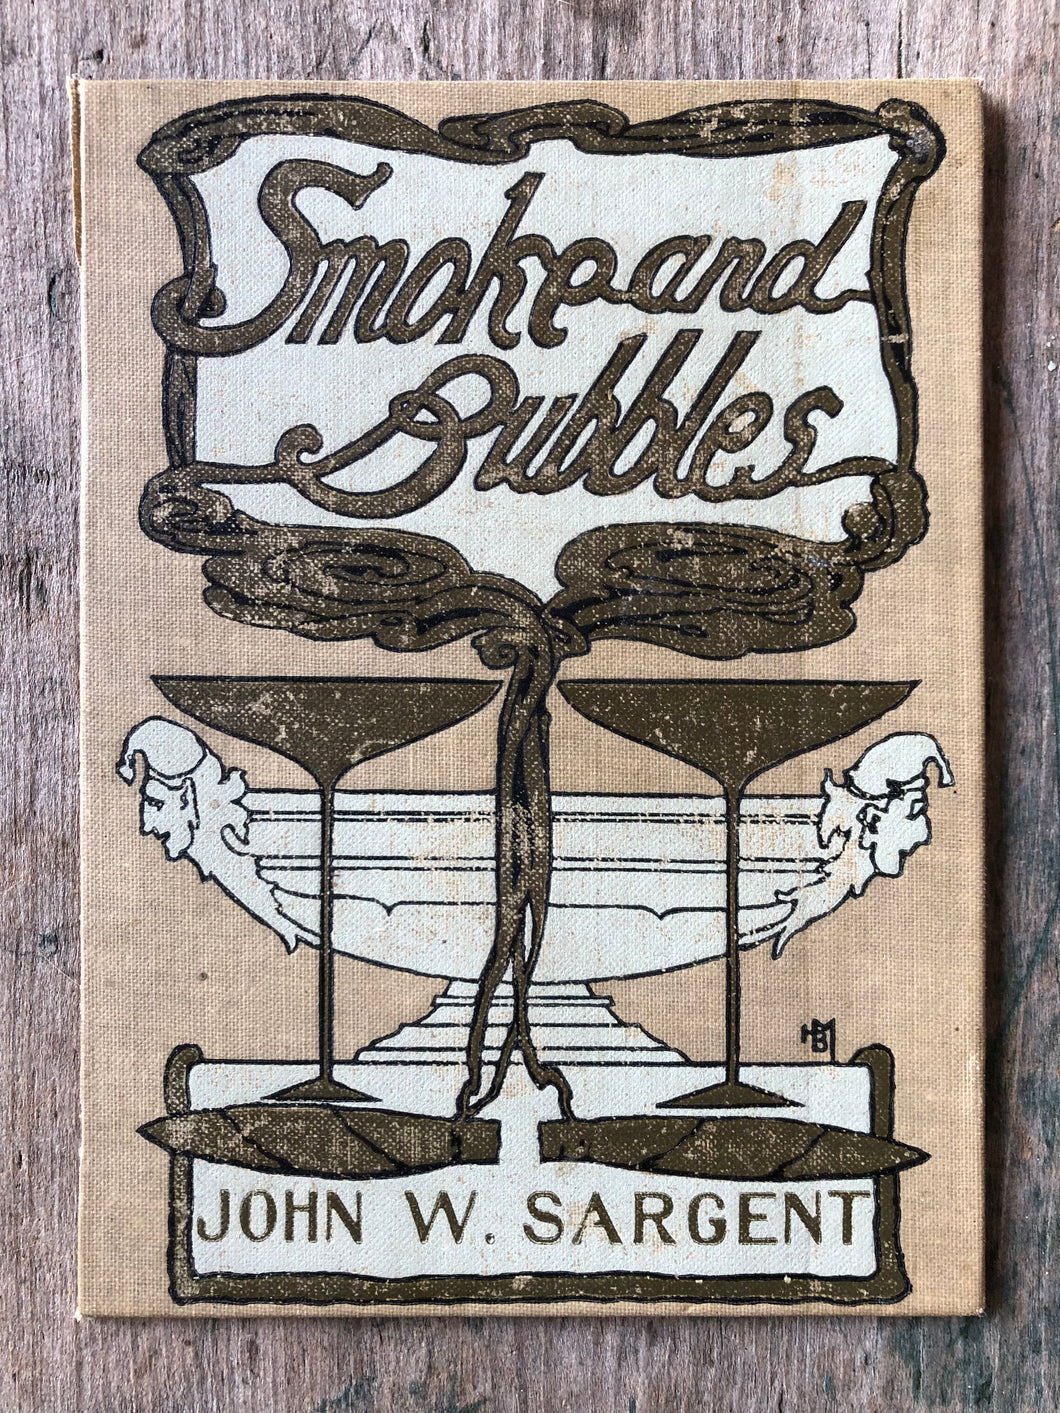 Cover from “Smoke and Bubbles” designed by Harry B. Matthews